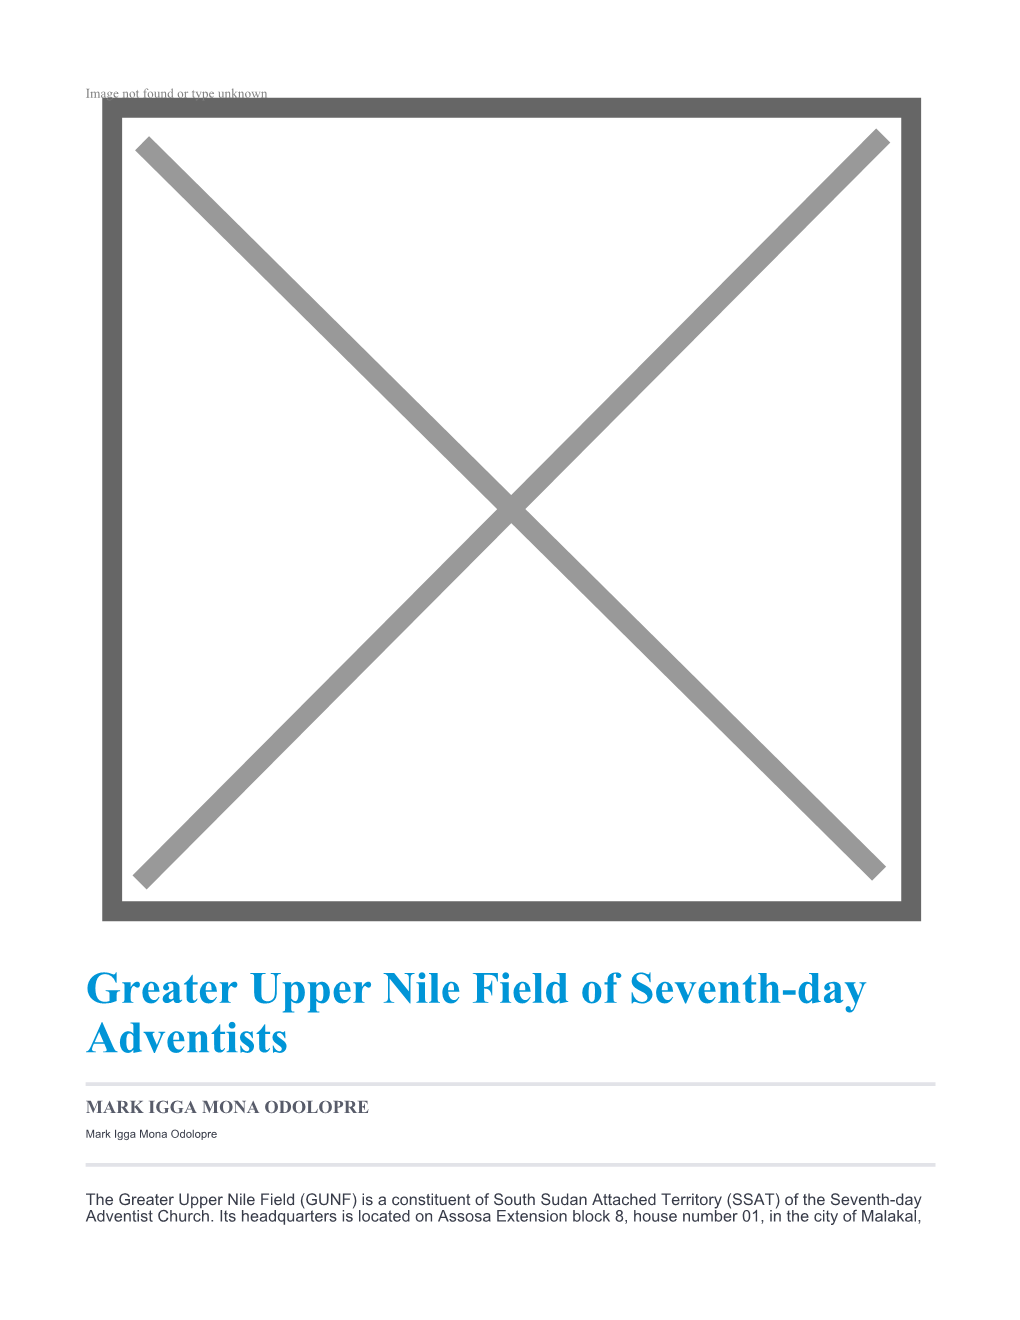 Greater Upper Nile Field of Seventh-Day Adventists